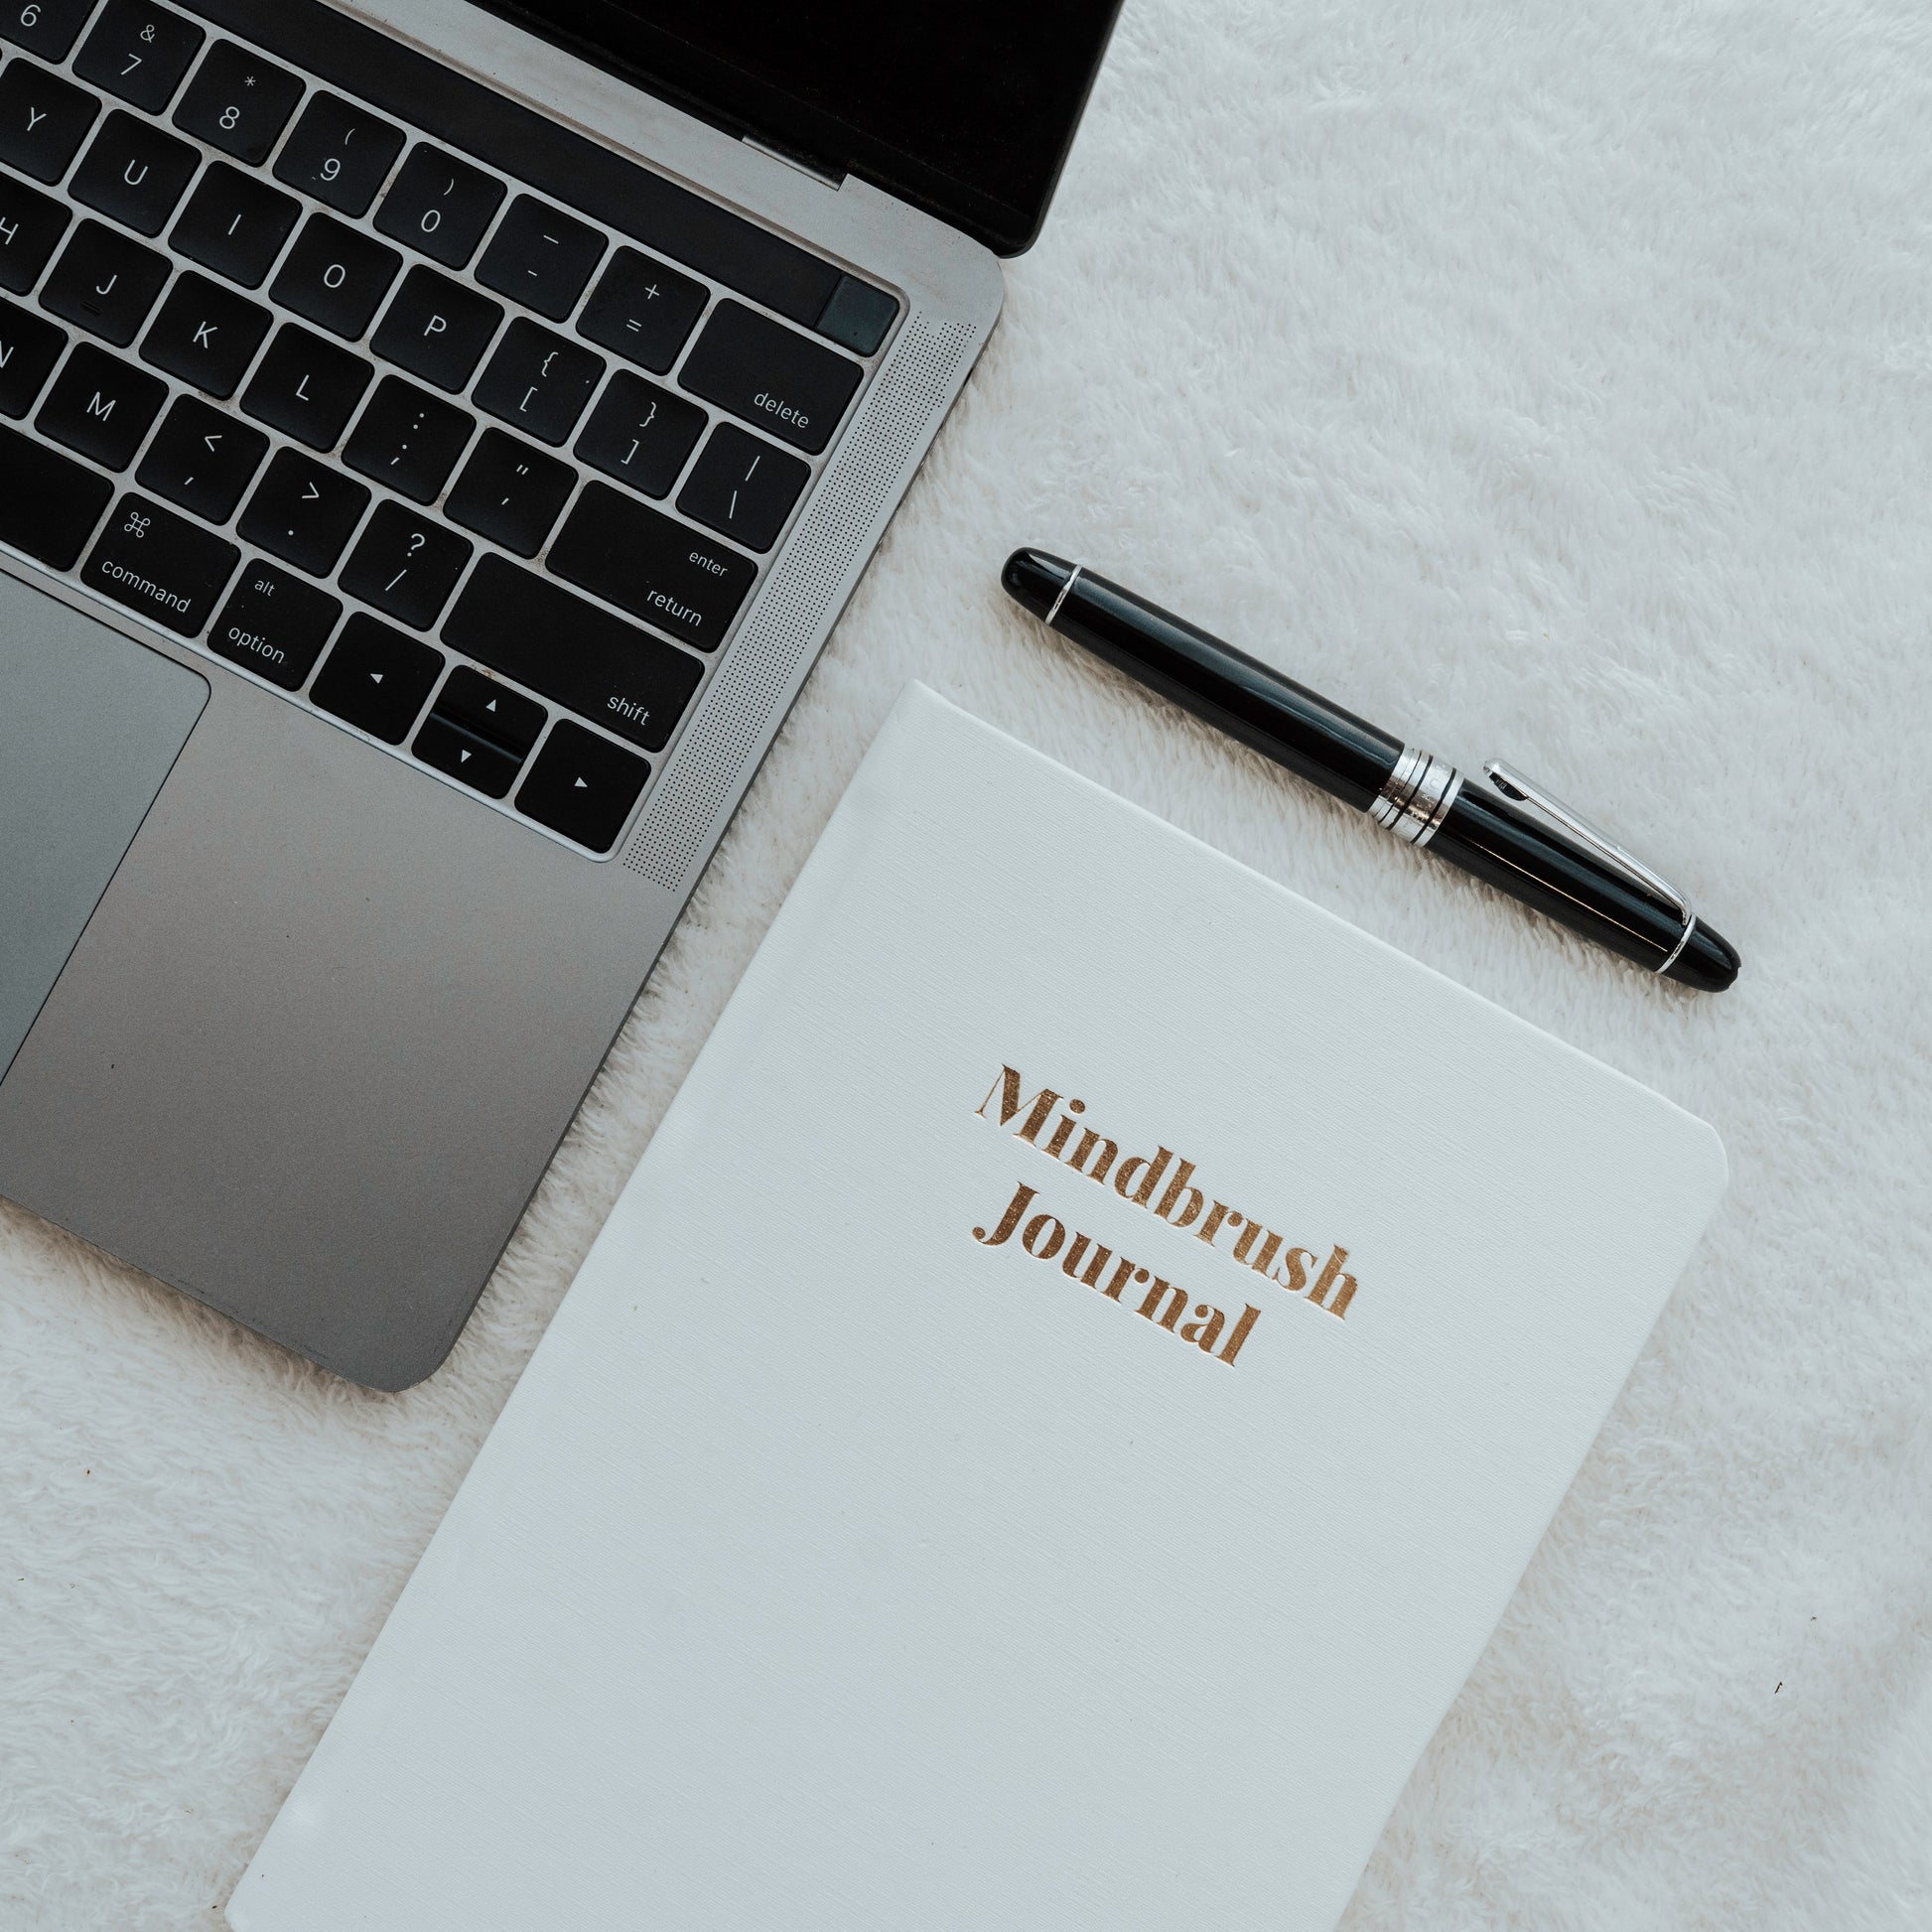 Mindbrush Journal - The Perfect Way to Practice Self-Care